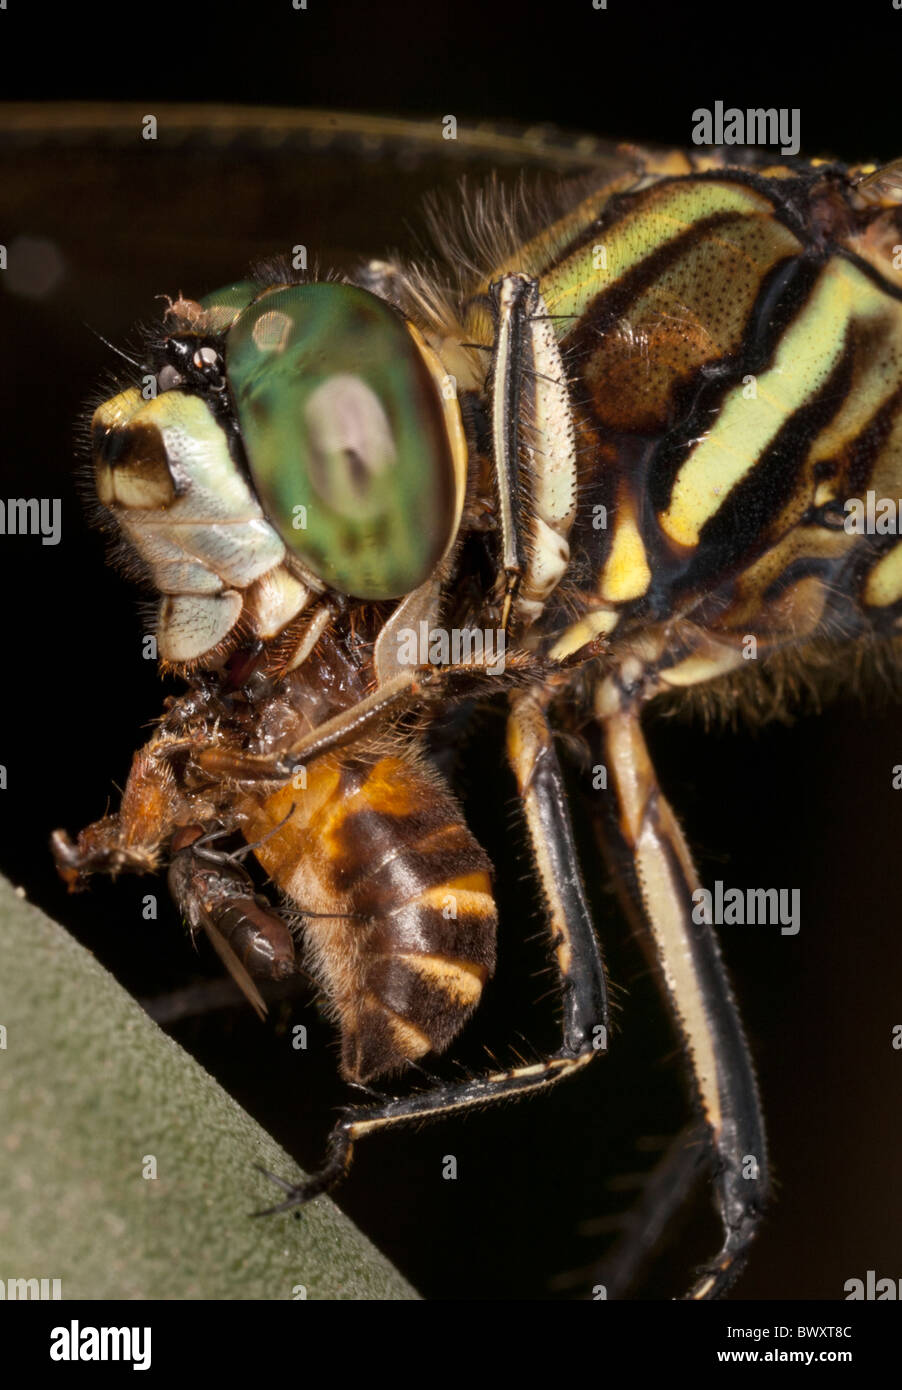 Cordulegaster species eating a bee, a kleptoparasitic fly on the bee, a phoretic mite, and lice under the wing of the fly Stock Photo